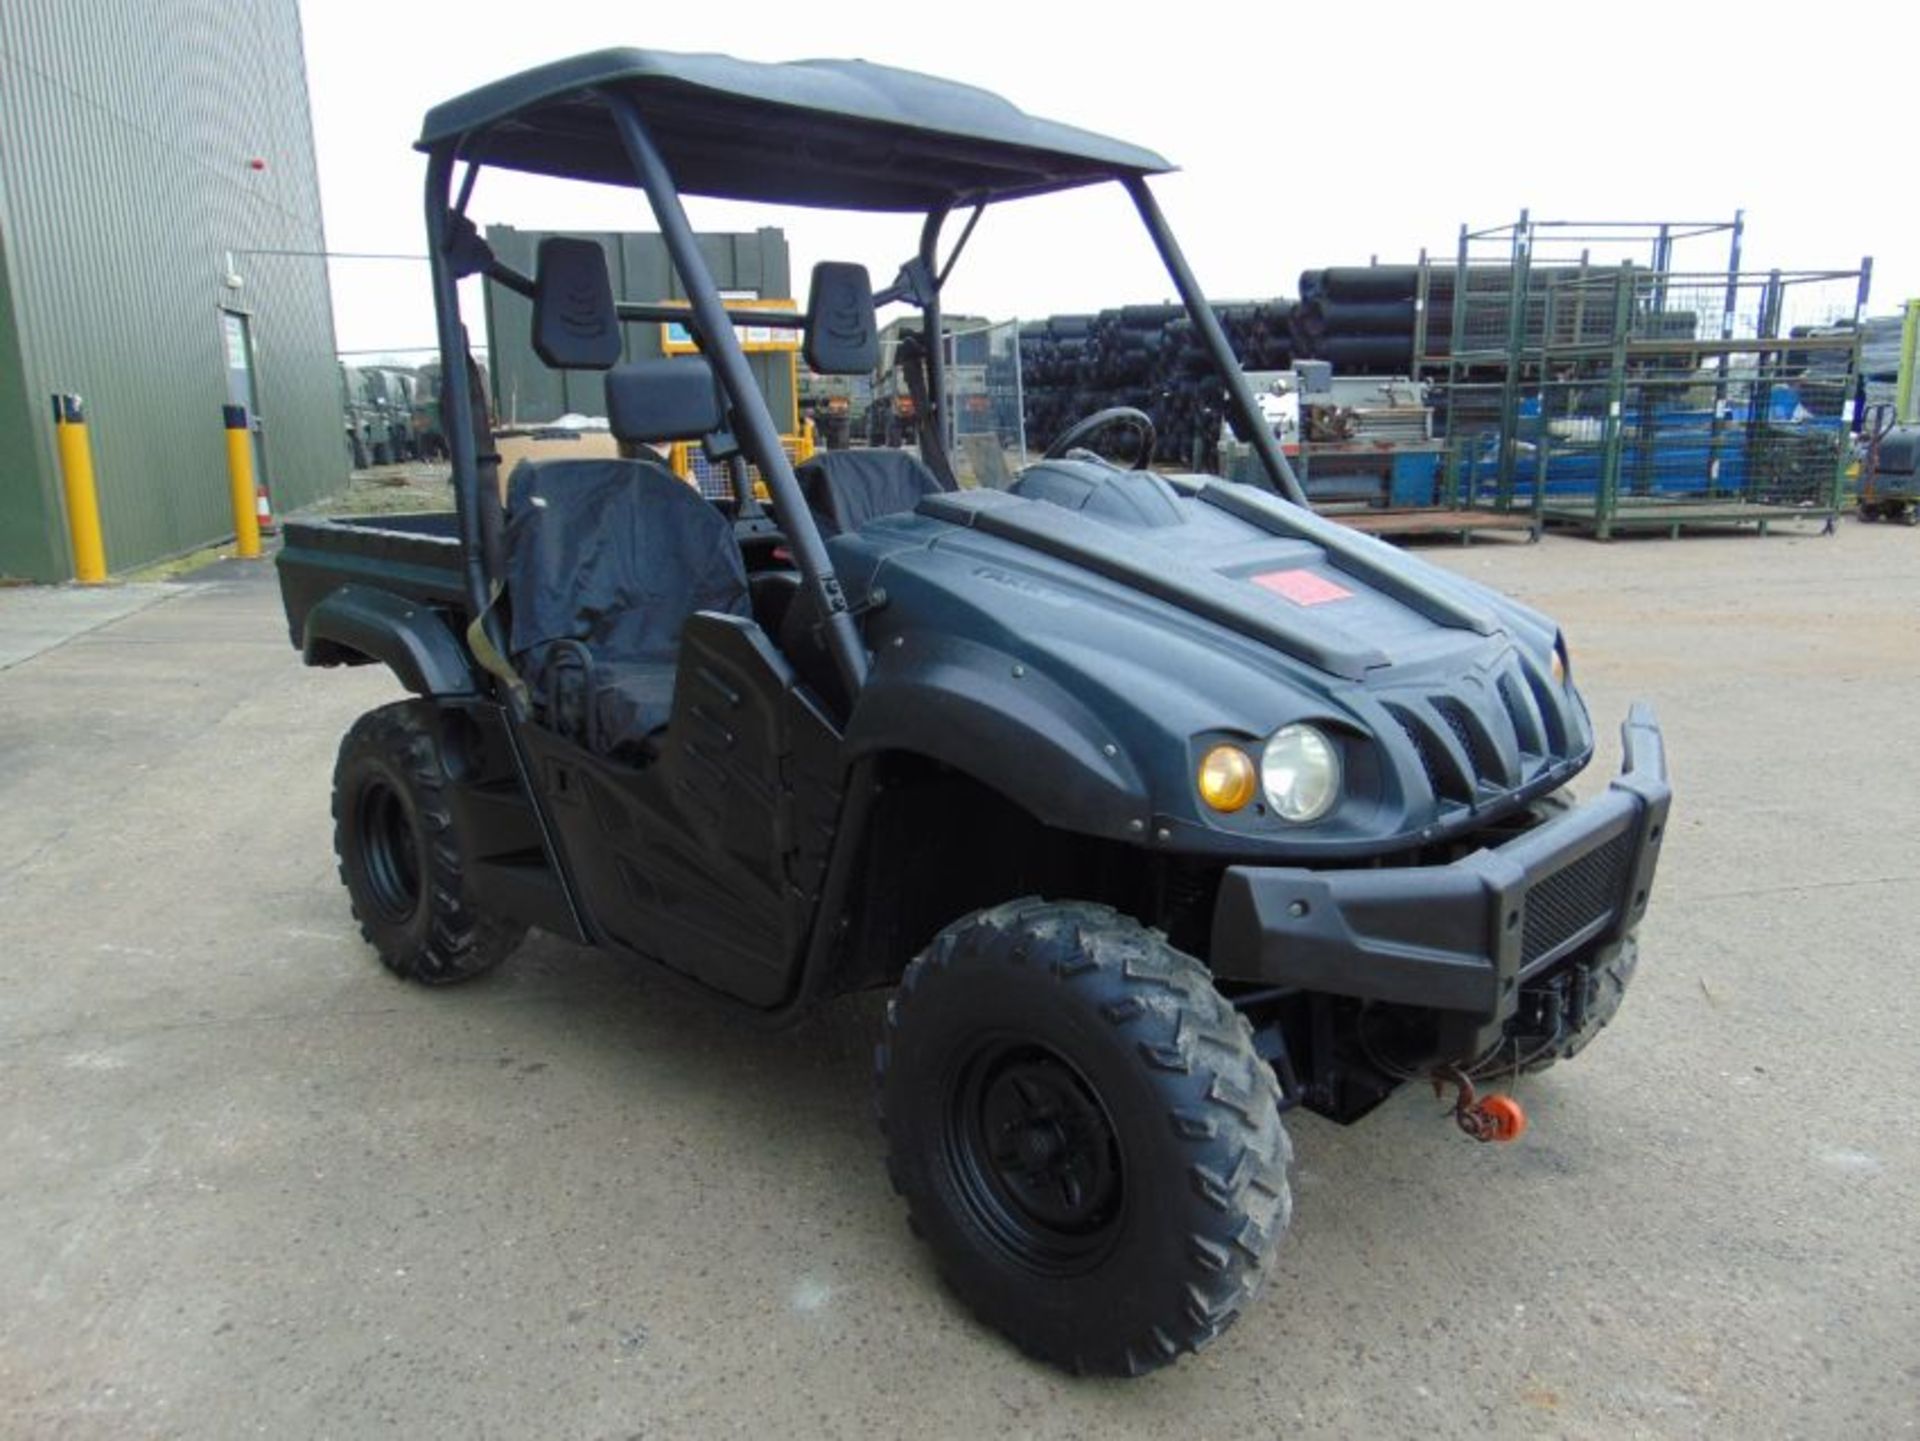 FARR 700 EFI Utility Vehicle ONLY 403 HOURS! - Image 4 of 22